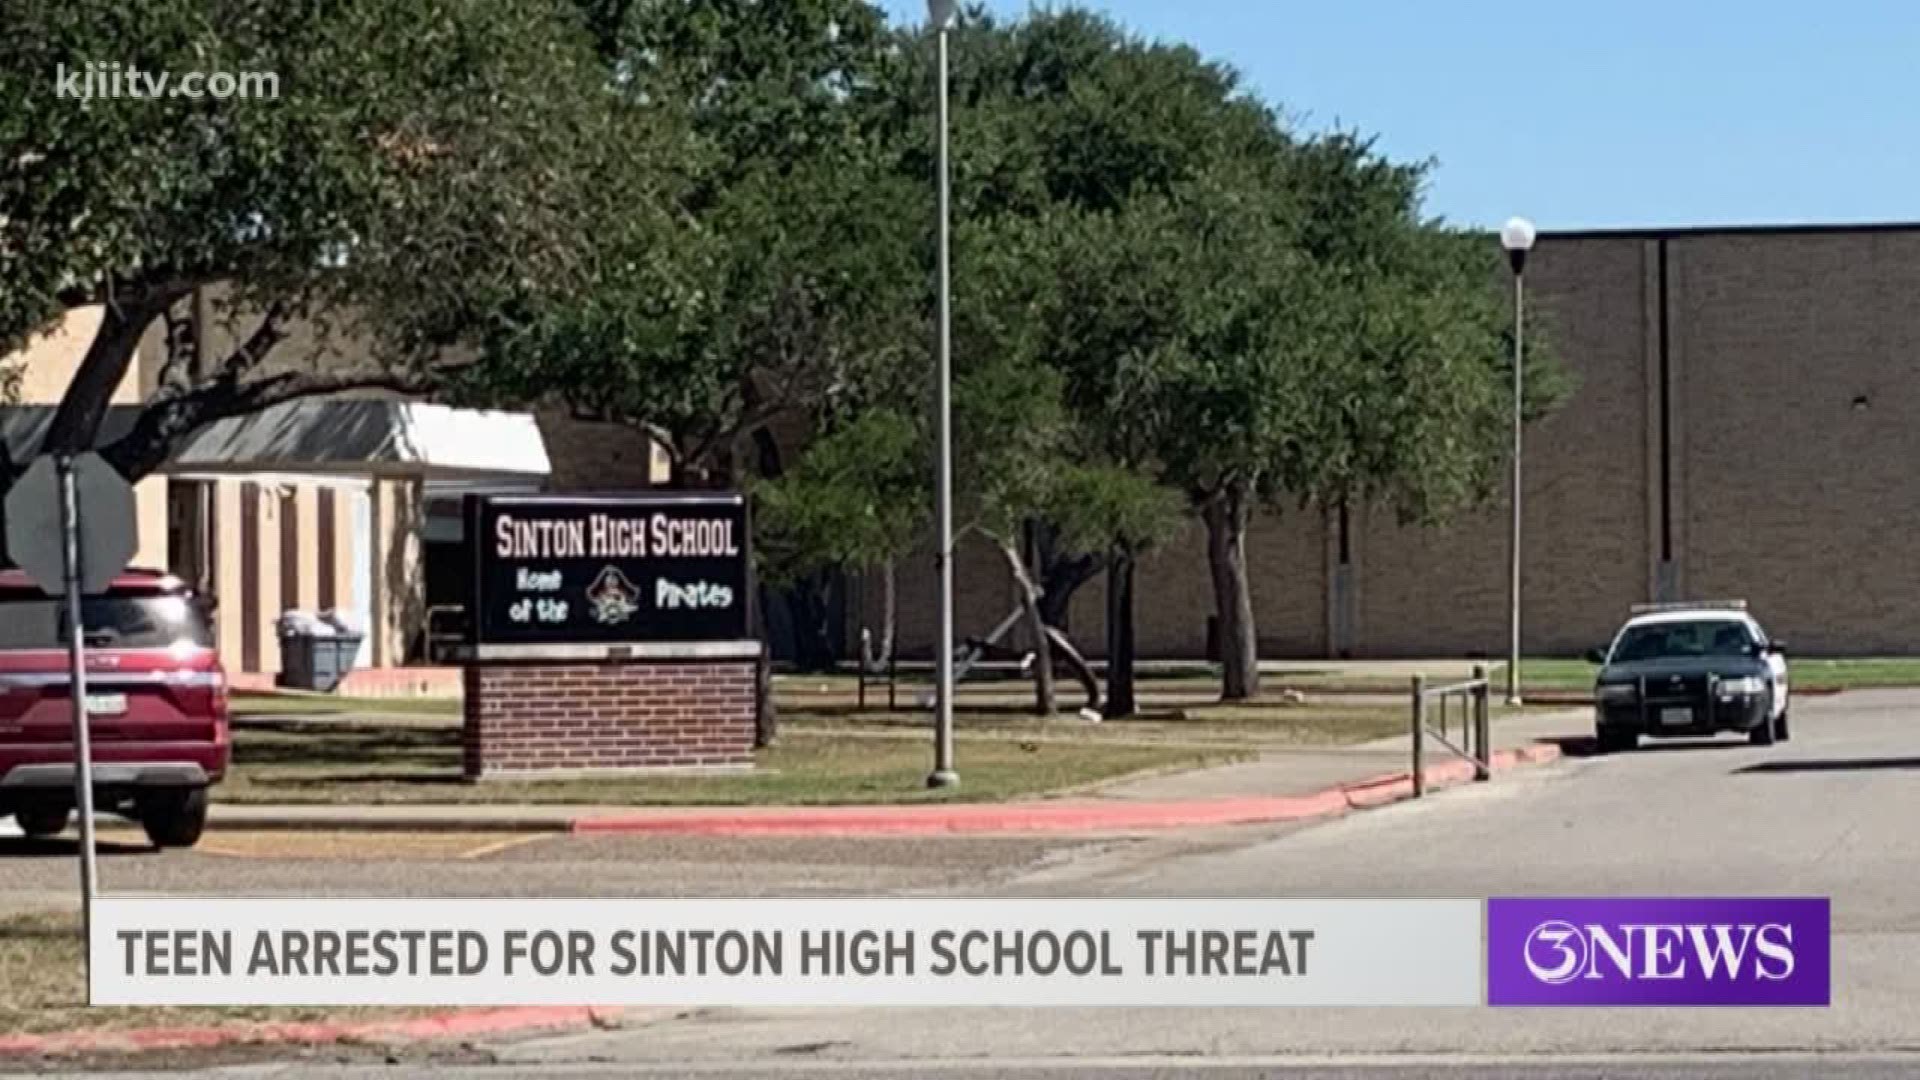 A 15-year-old student at Sinton High School was arrested Tuesday after allegedly posting a threatening Snapchat video.